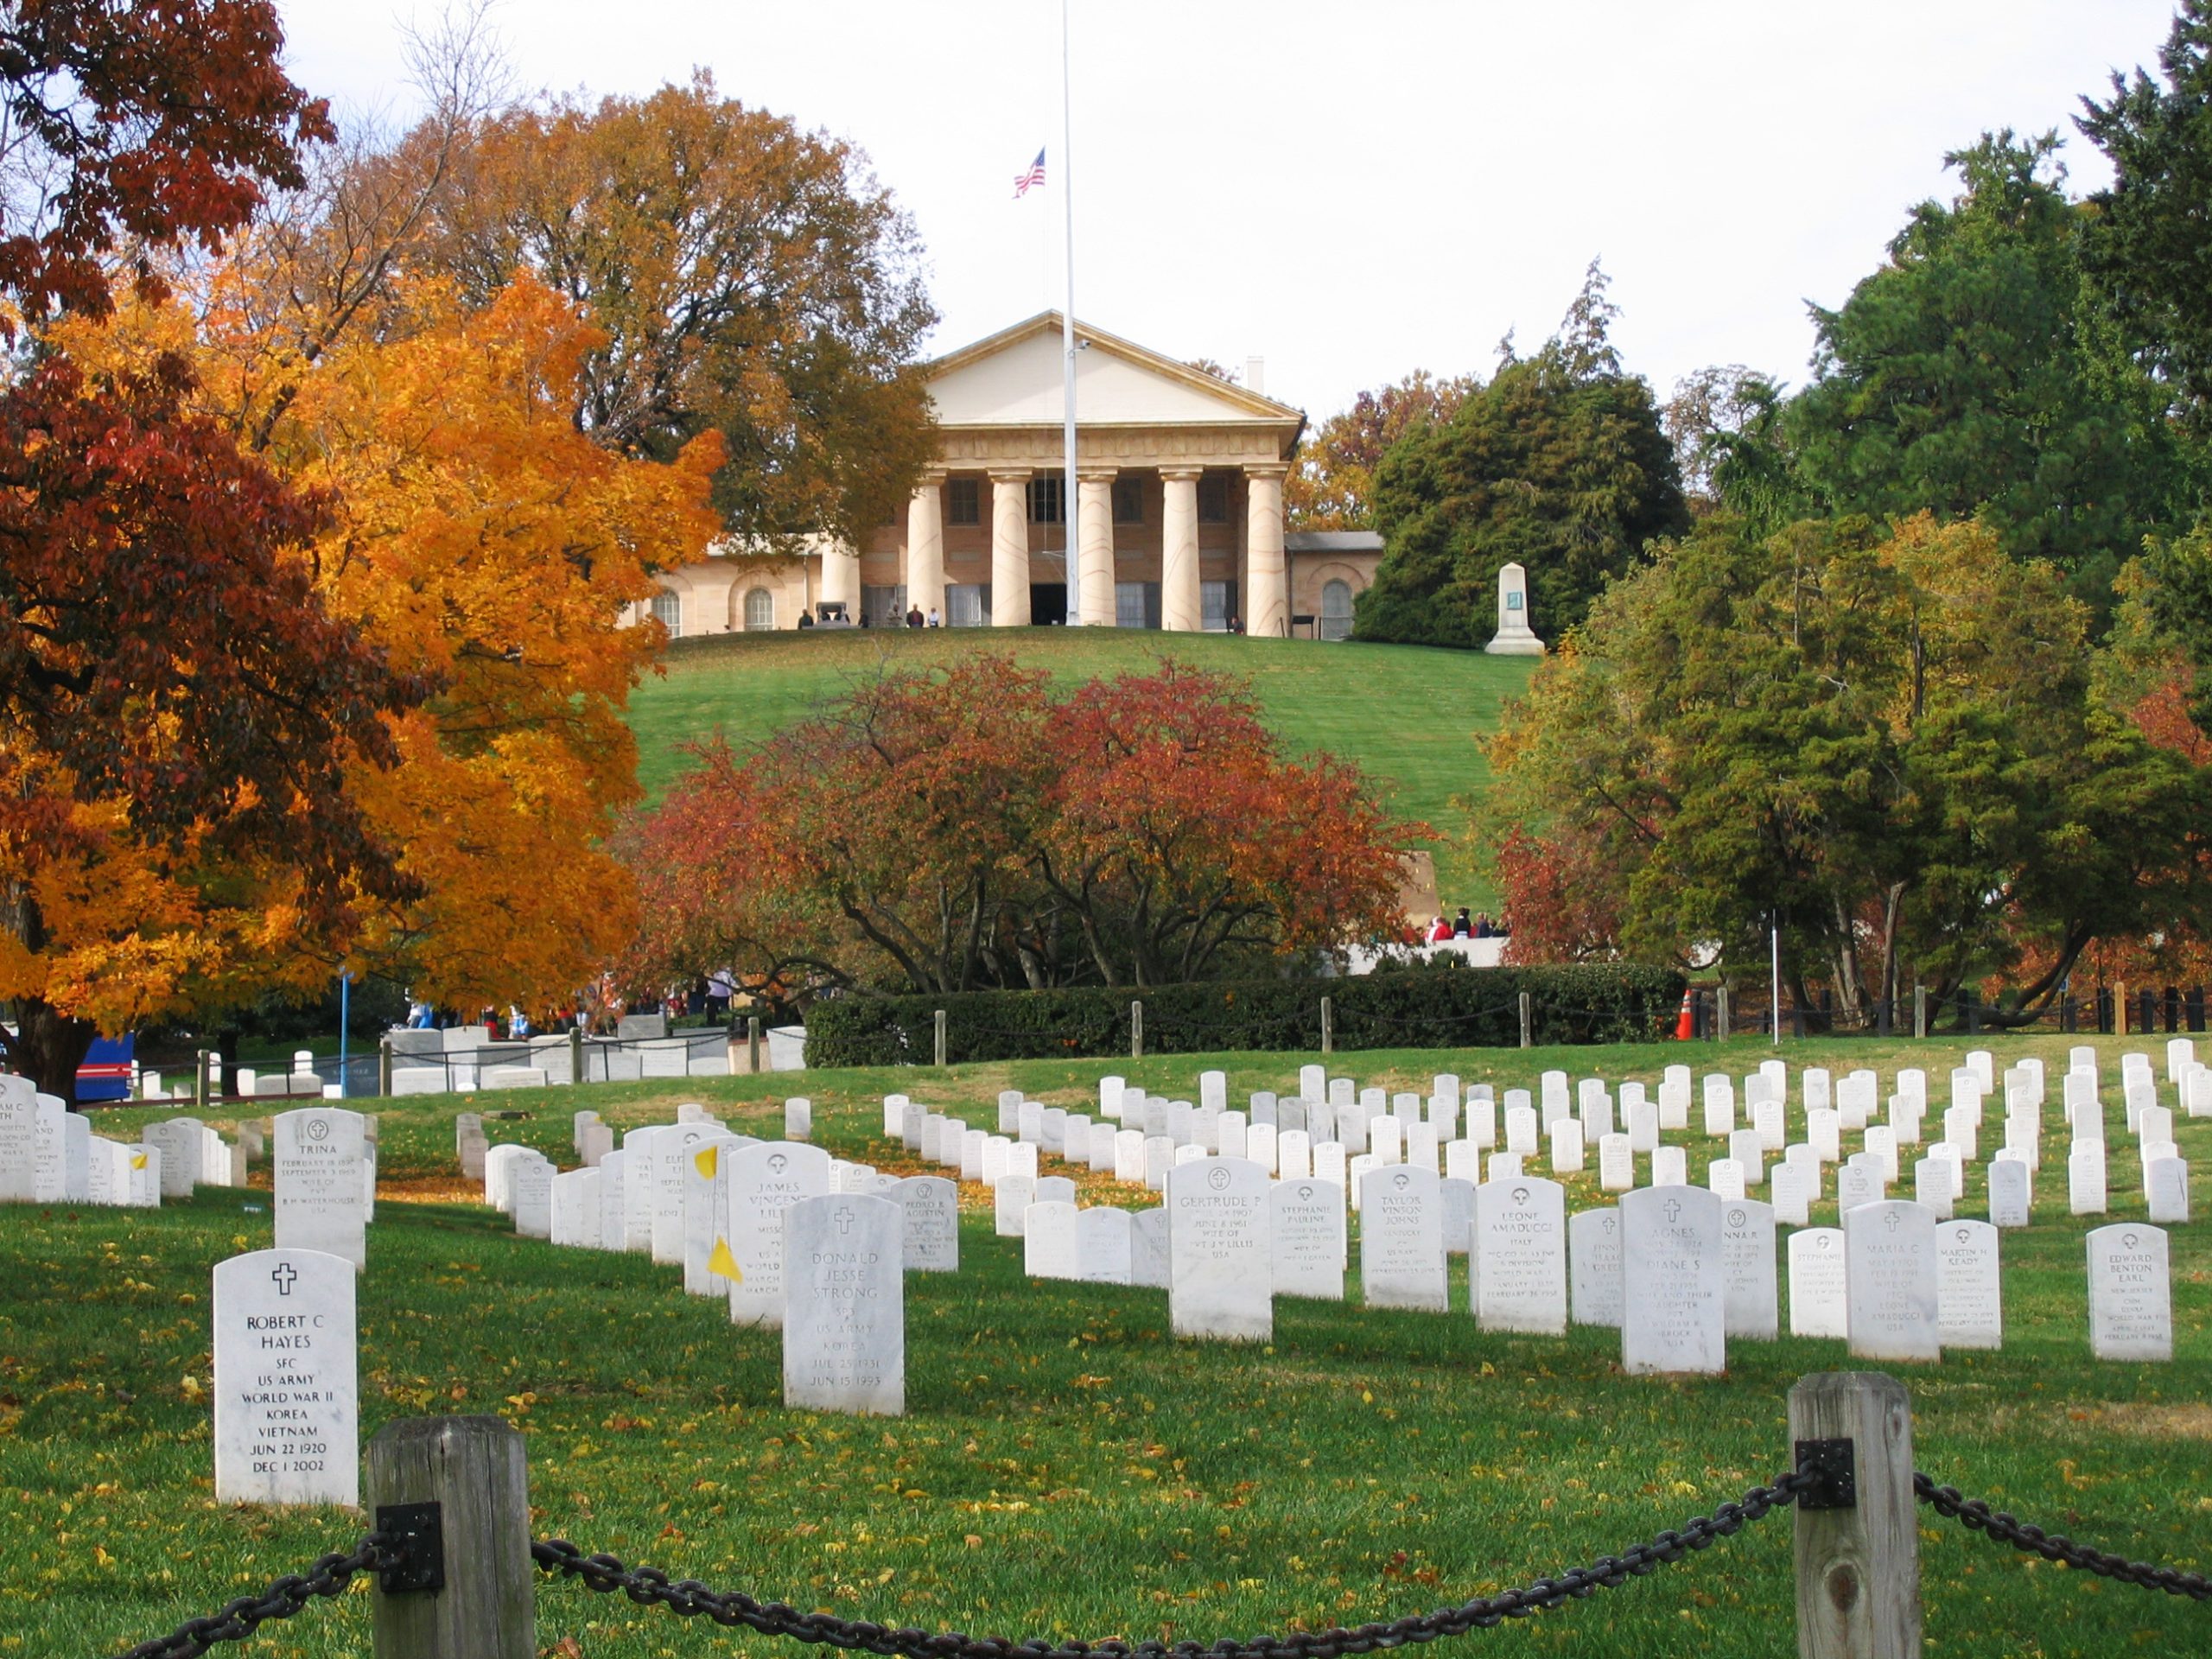 000-0042_Arlington_National_Cemetery_HD_2005_VLR_Online-scaled